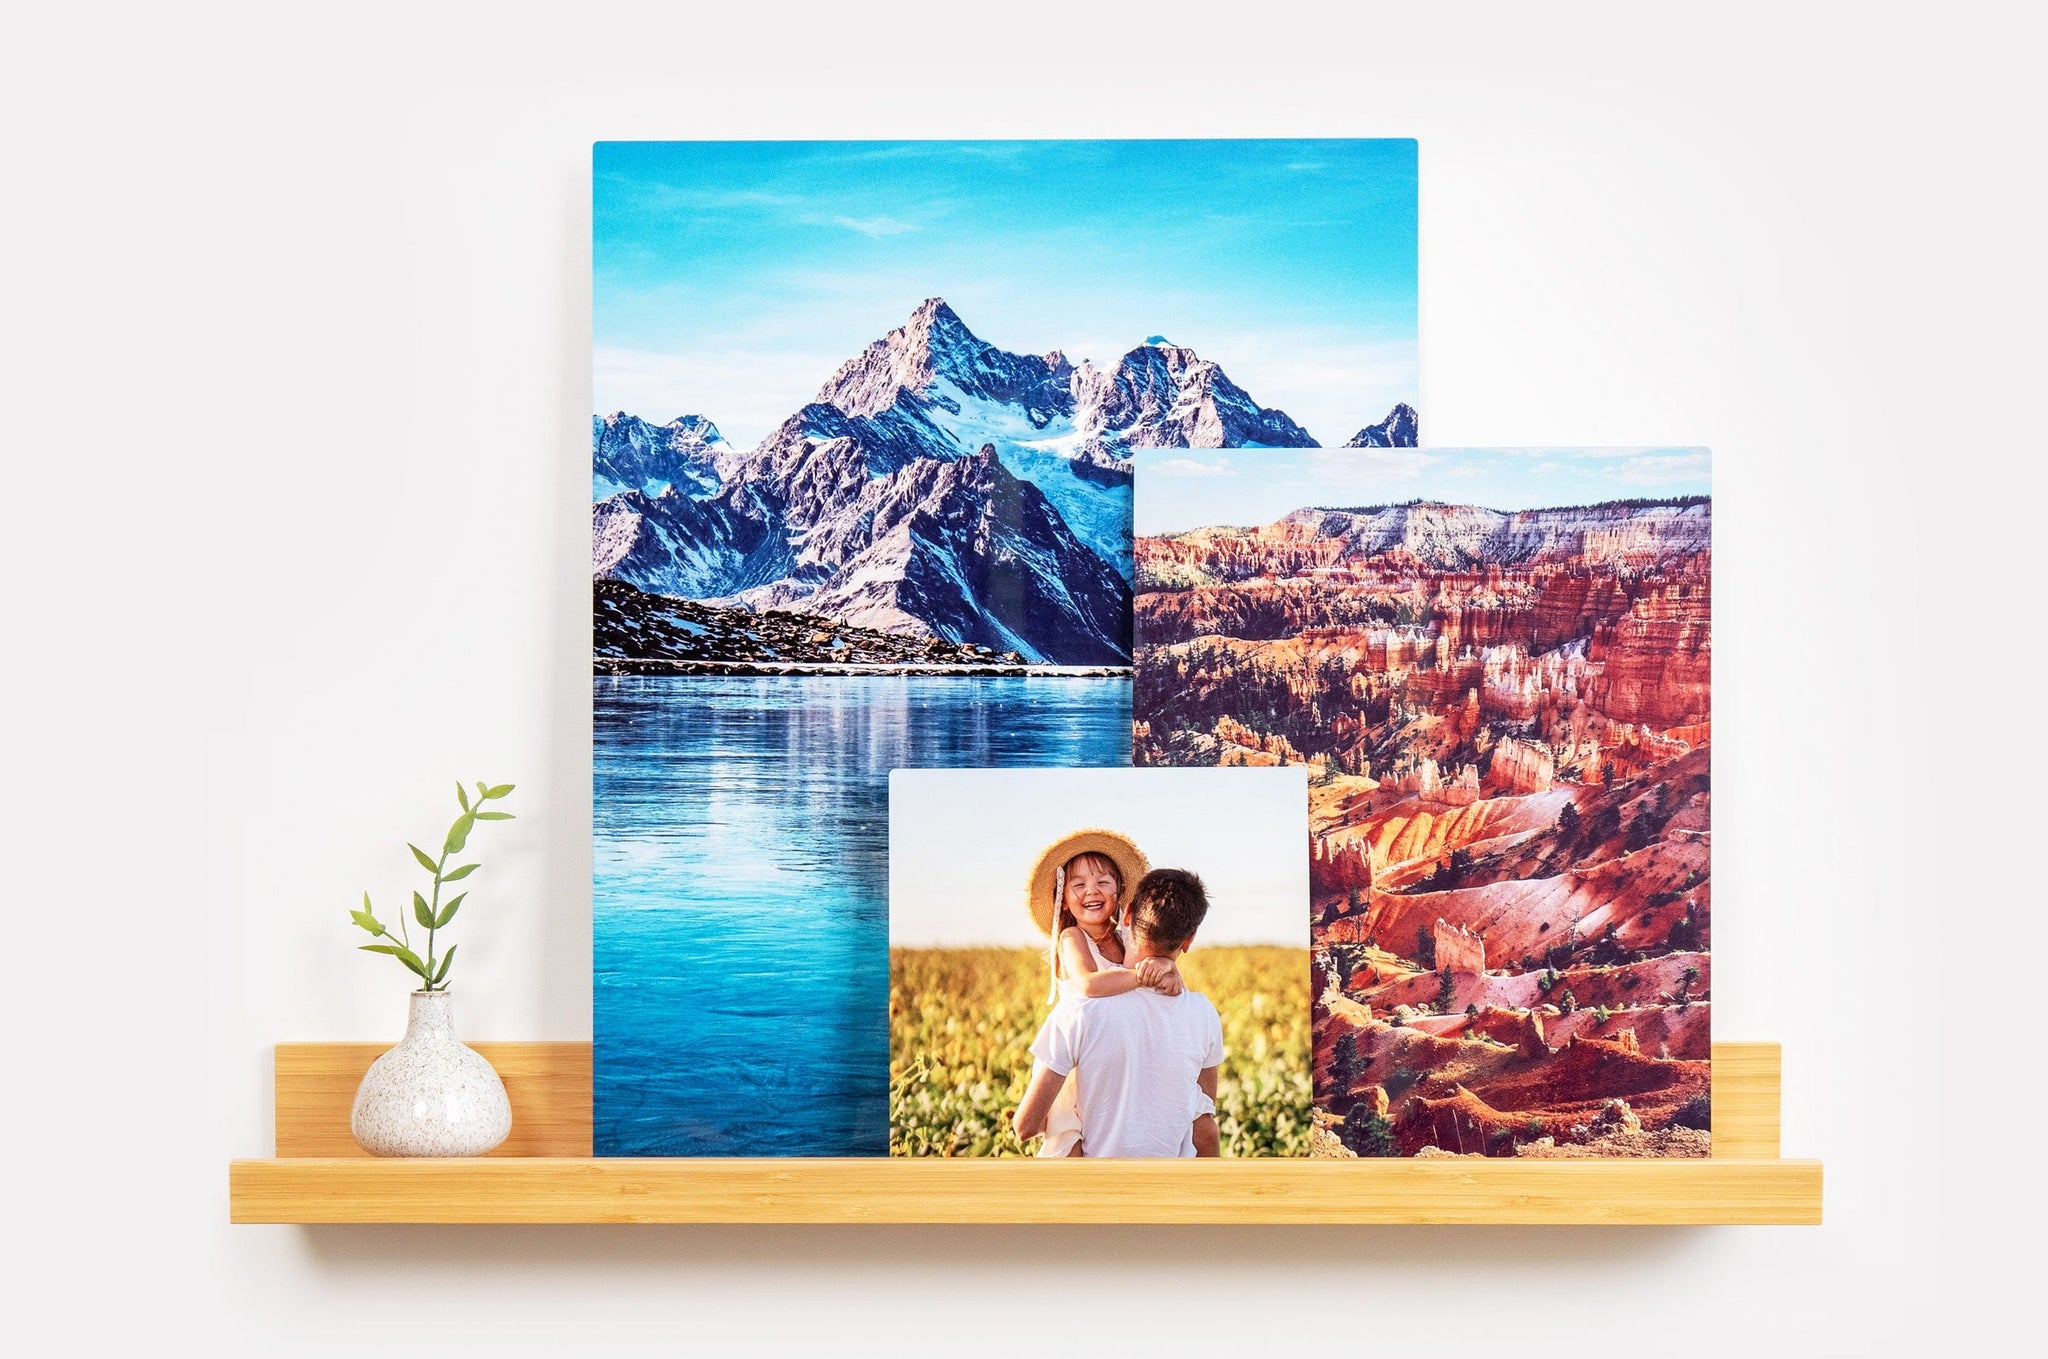 Three Metal Prints of different sizes arranged on a photo ledge. The first Metal Print features a picture of a father and daughter, and the other two are photos of landscapes.